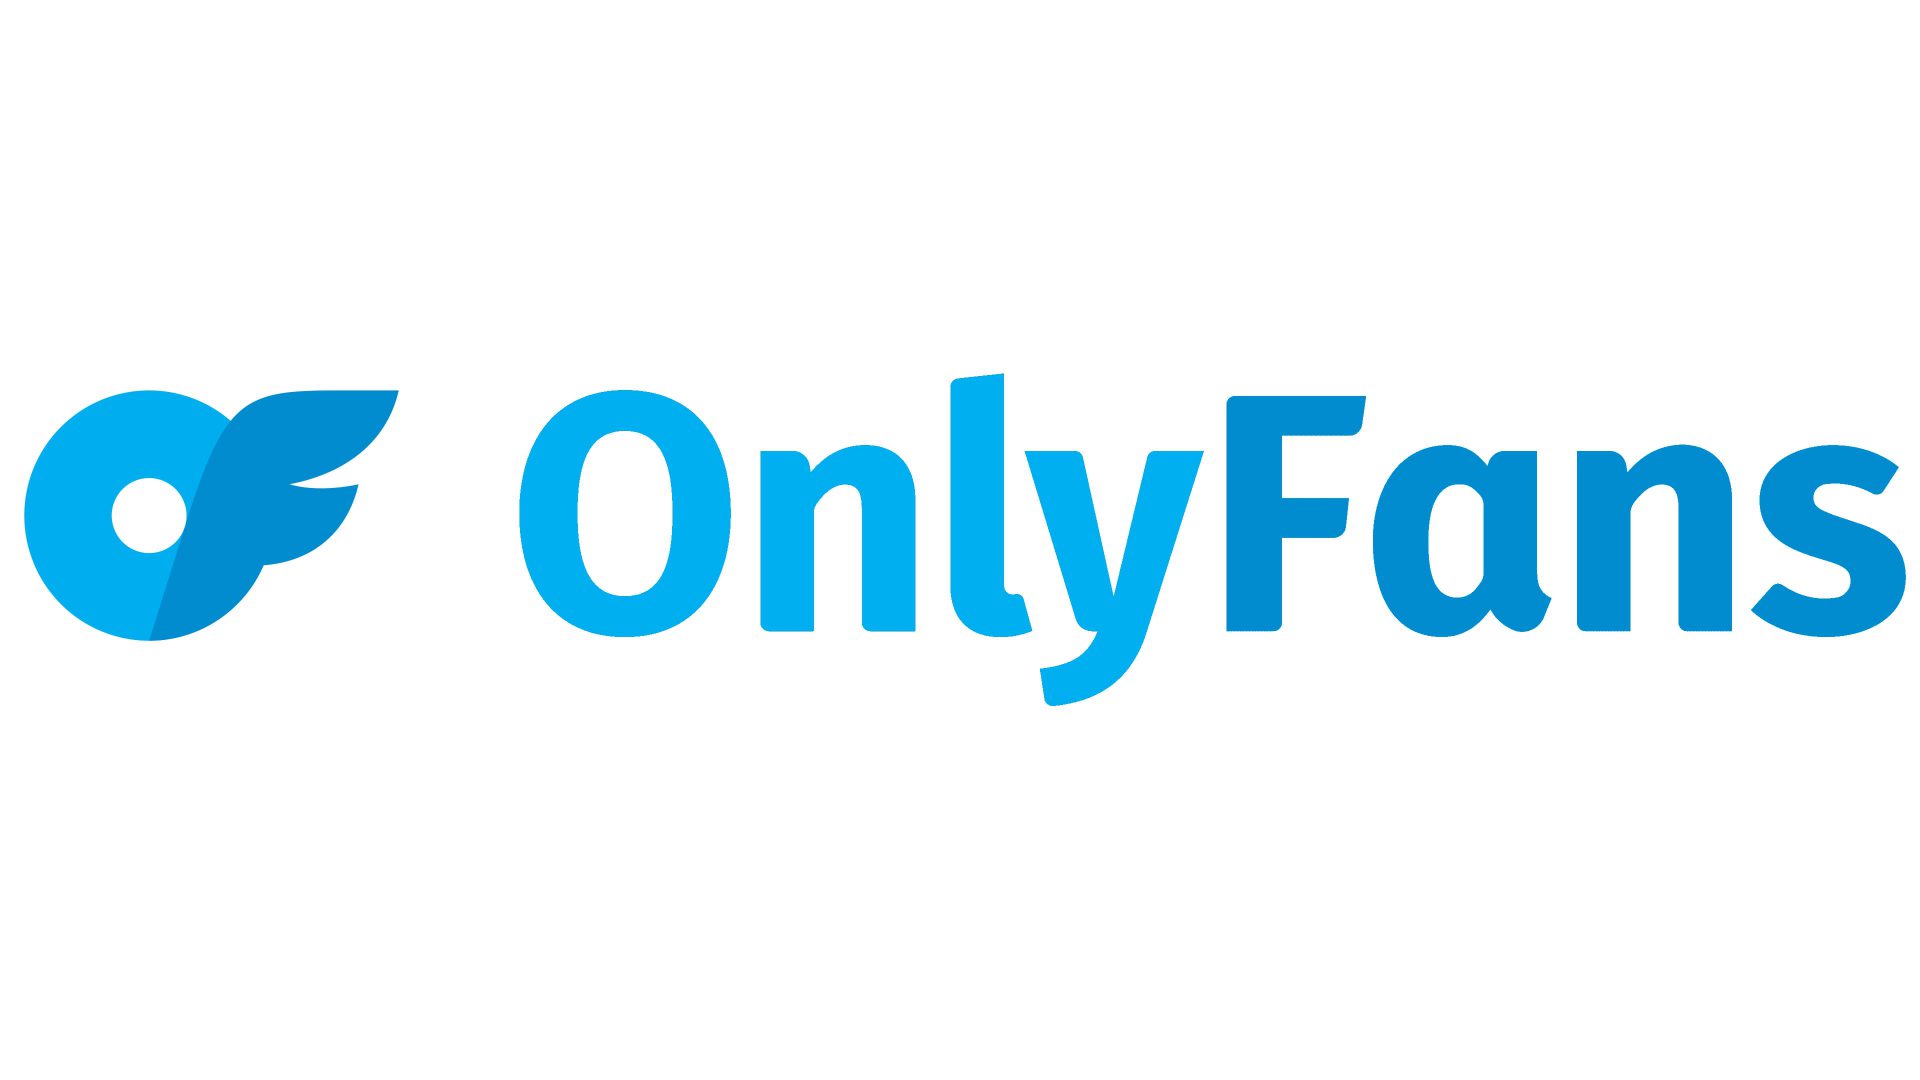 What Is Onlyfans Chatter